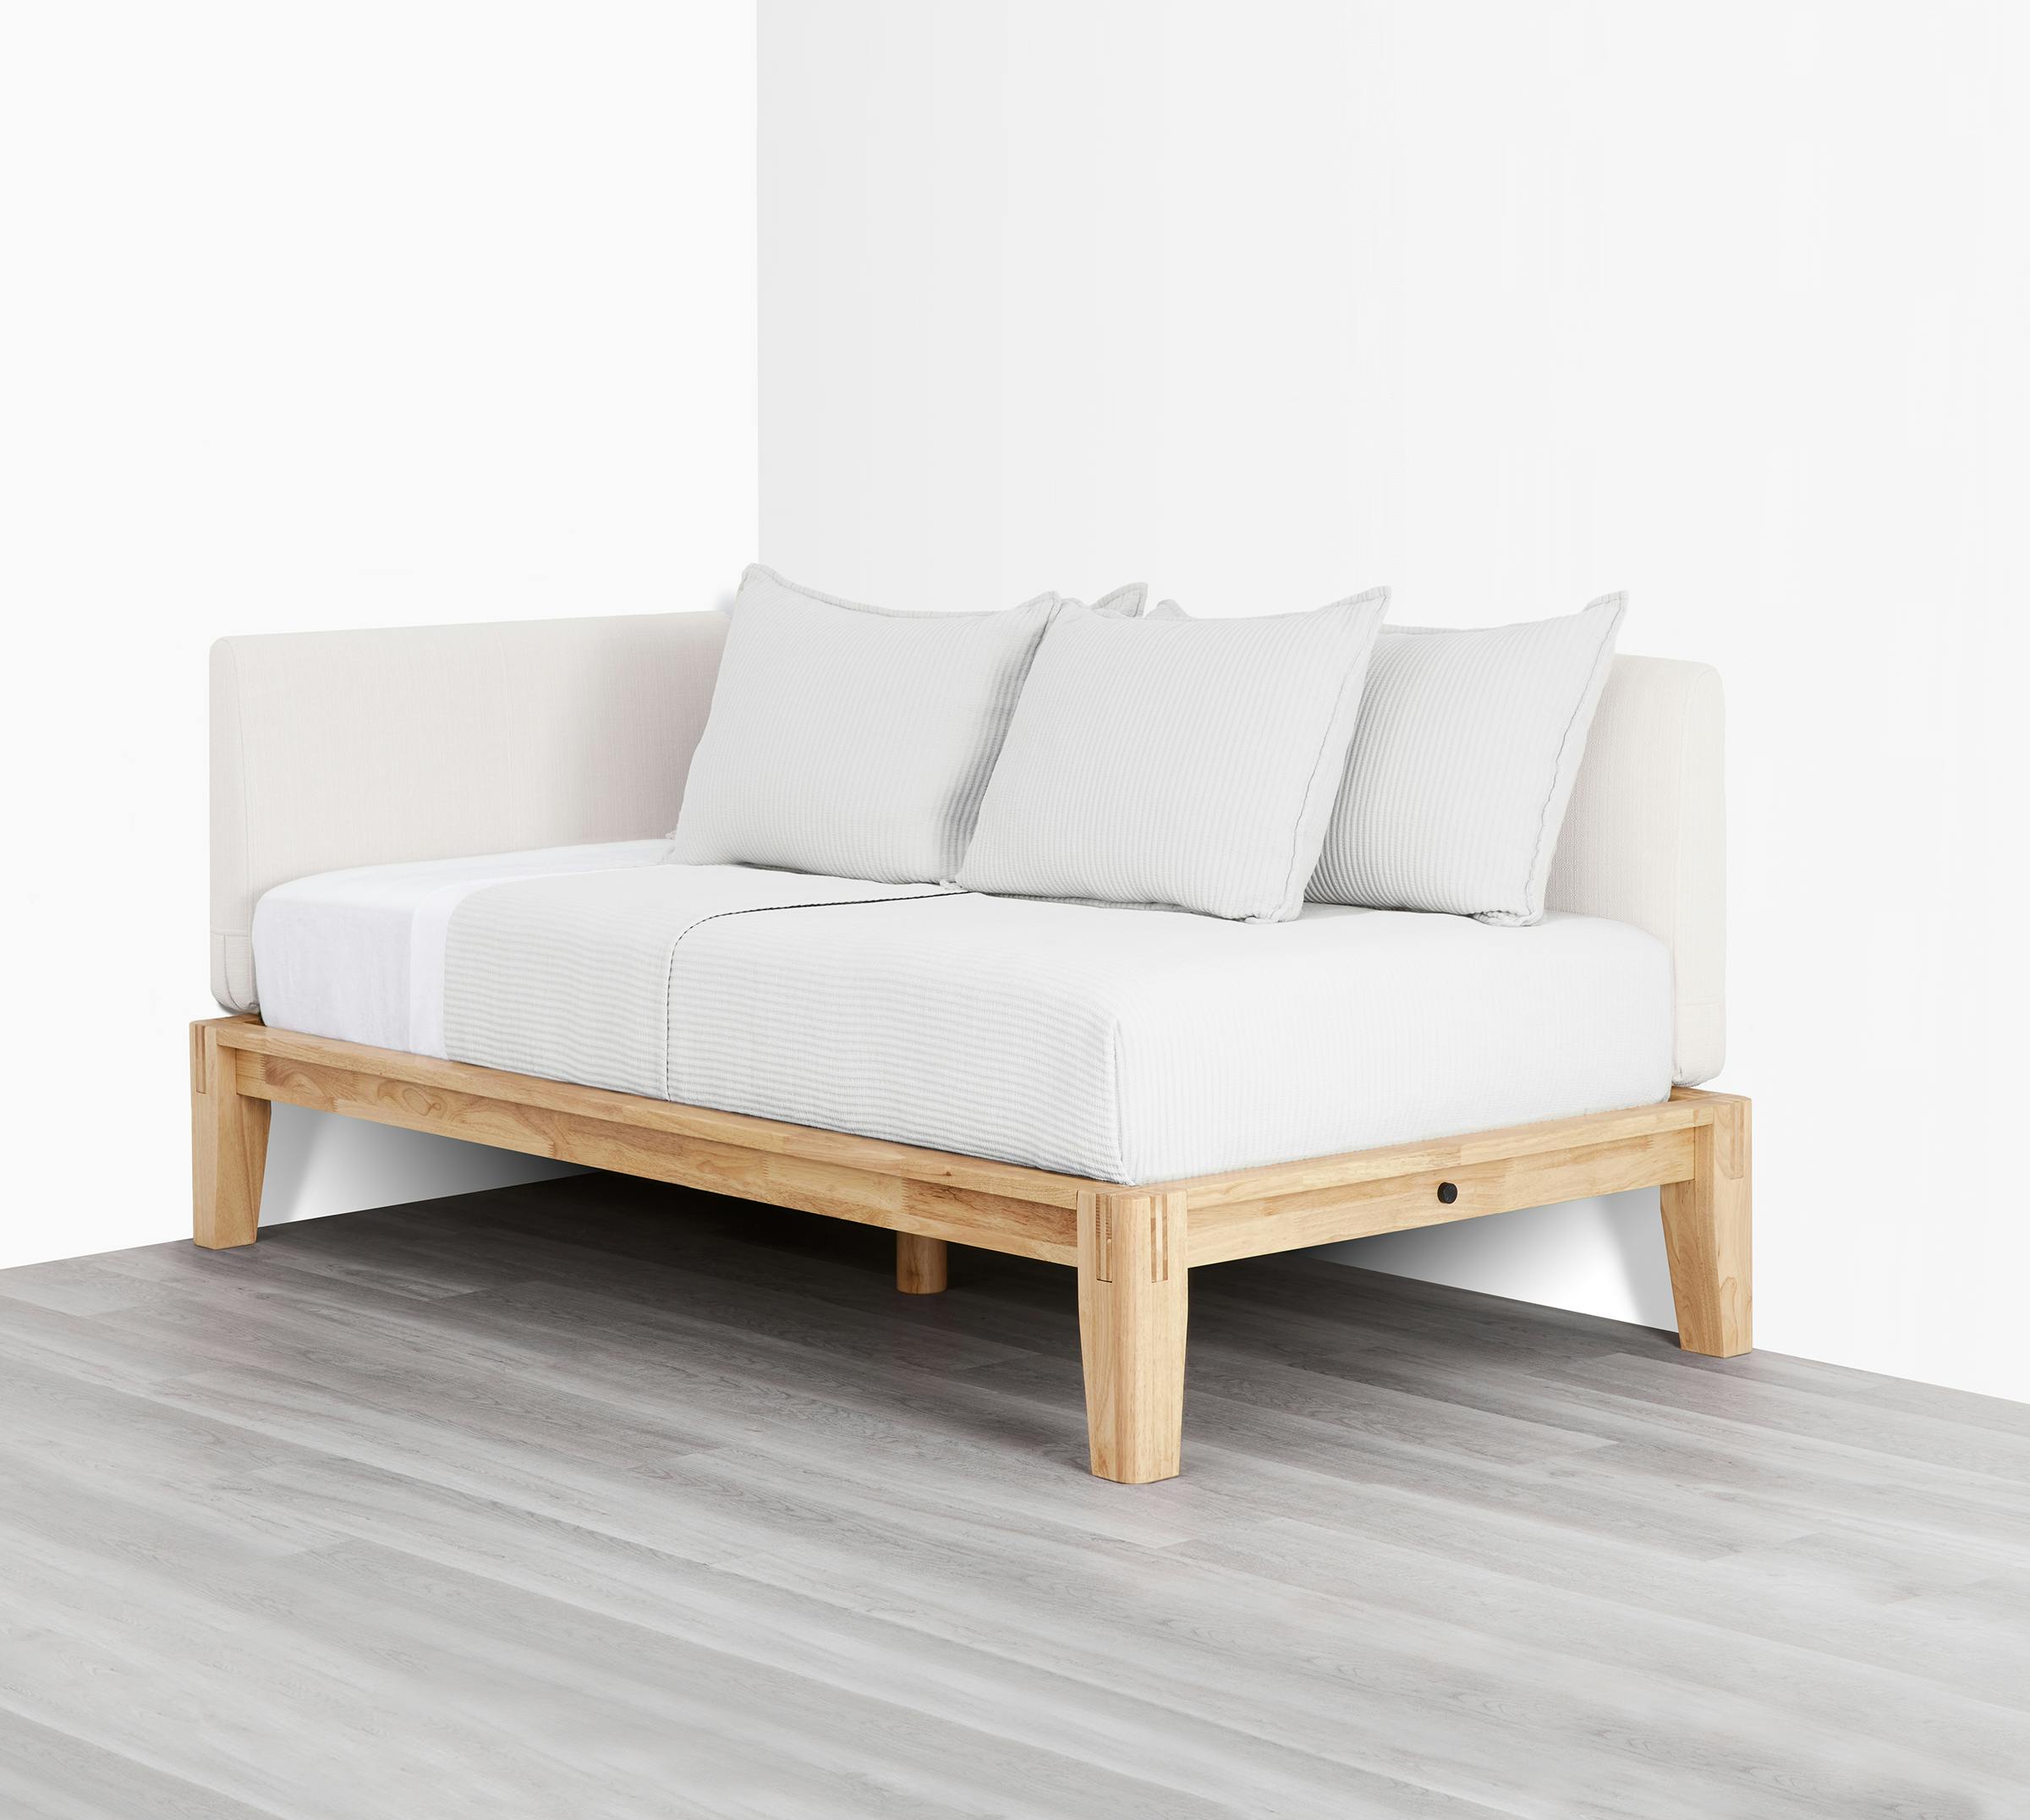 The Bed (Daybed / Natural / Light Linen) - Diagonal 3